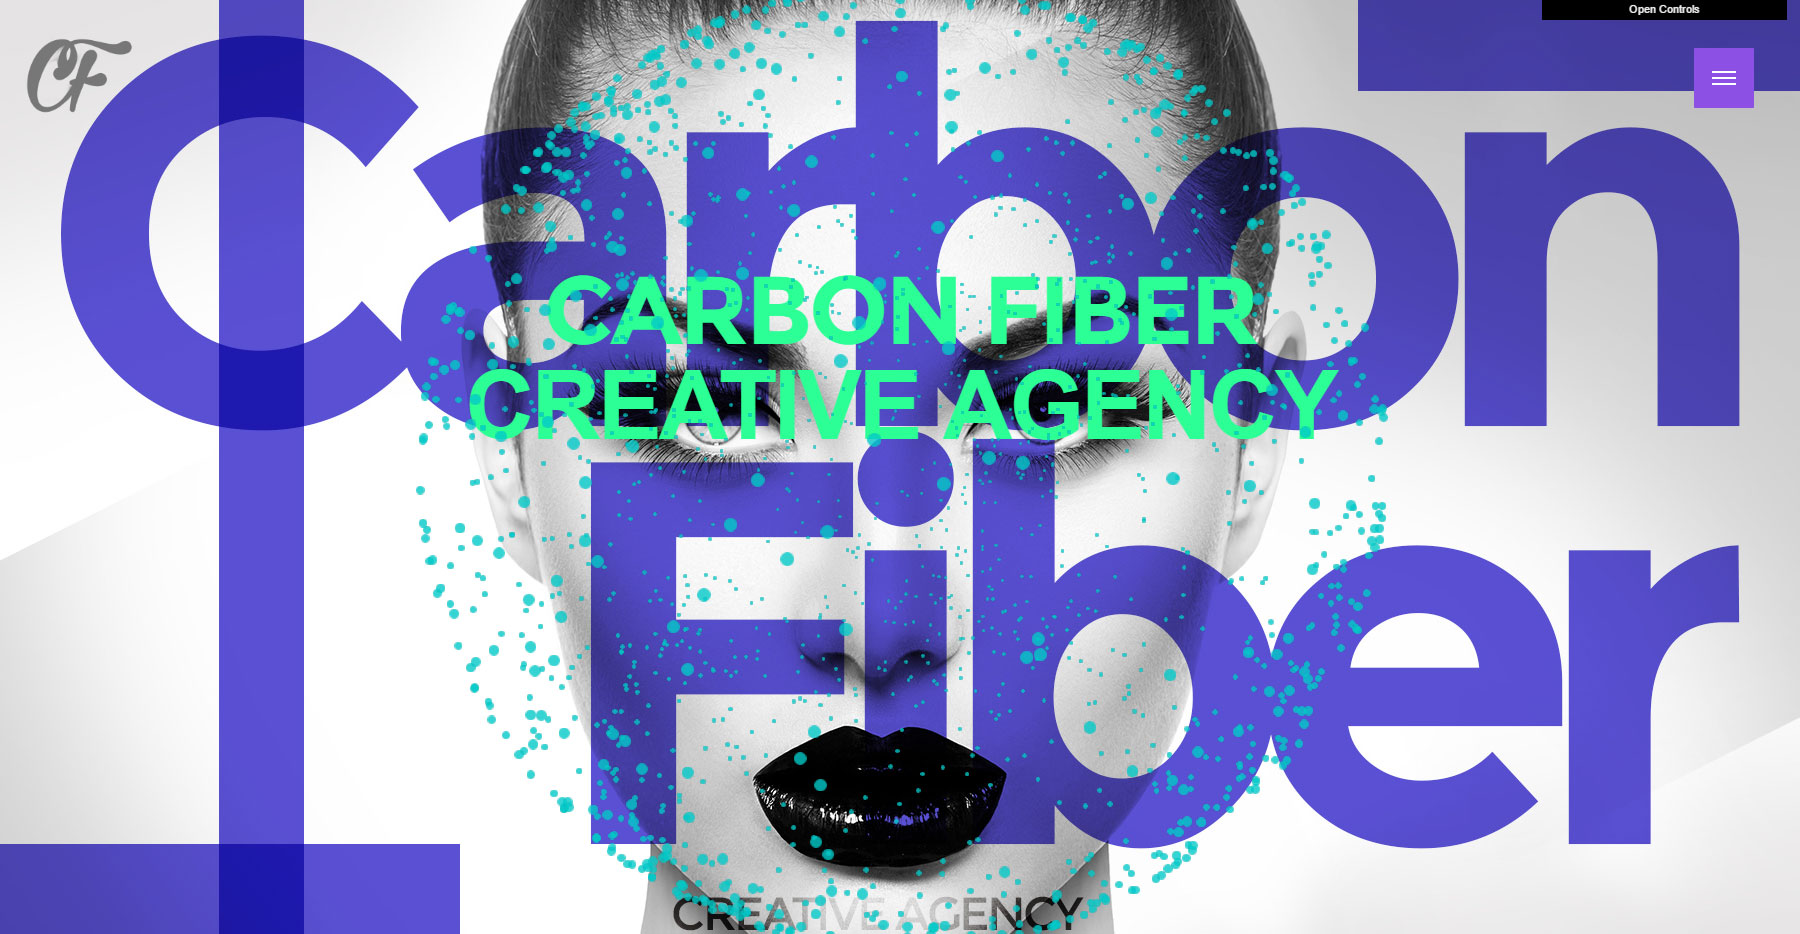 Carbon Fiber Creative Agency - Website of the Day